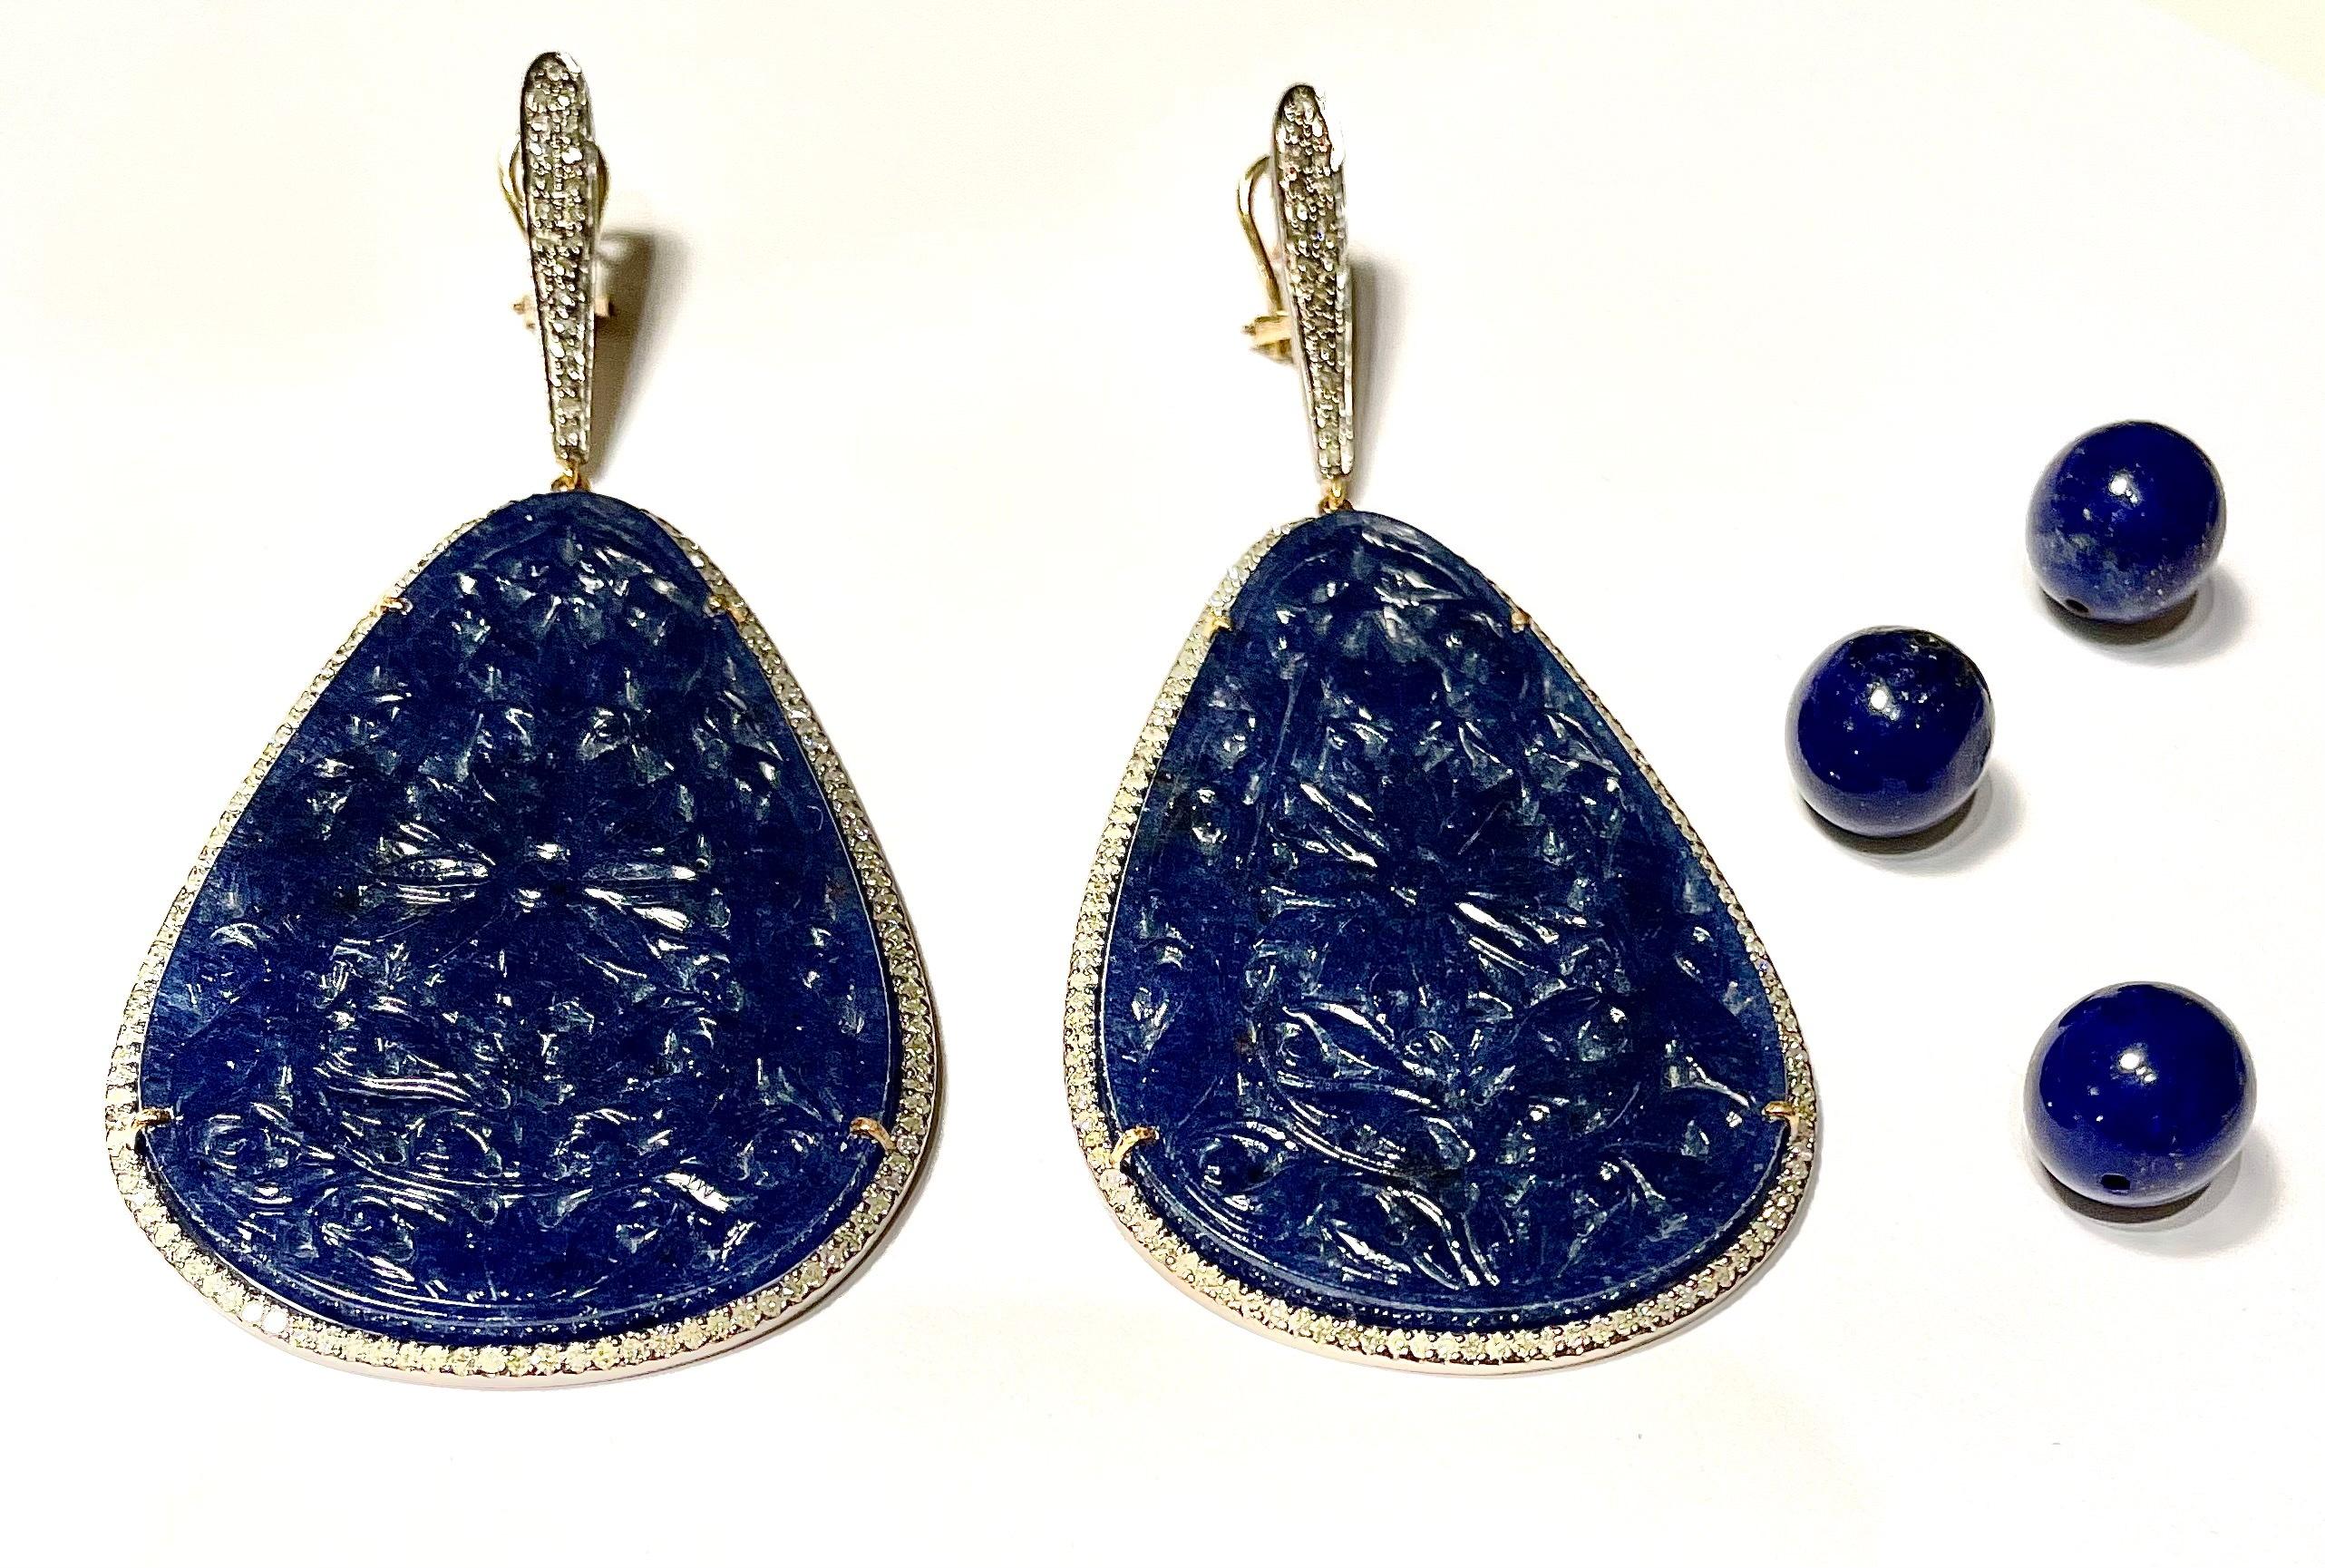 Description
Dramatic hand-carved large Midnight Blue Onyx and pave diamond earrings featuring easy to use Omega backs.
Item # E3256

Materials and Weight
Blue Onyx, 40 x 61mm, pear shape, 105 carats.
Pave diamonds, 3.02 carats.
Posts with omega